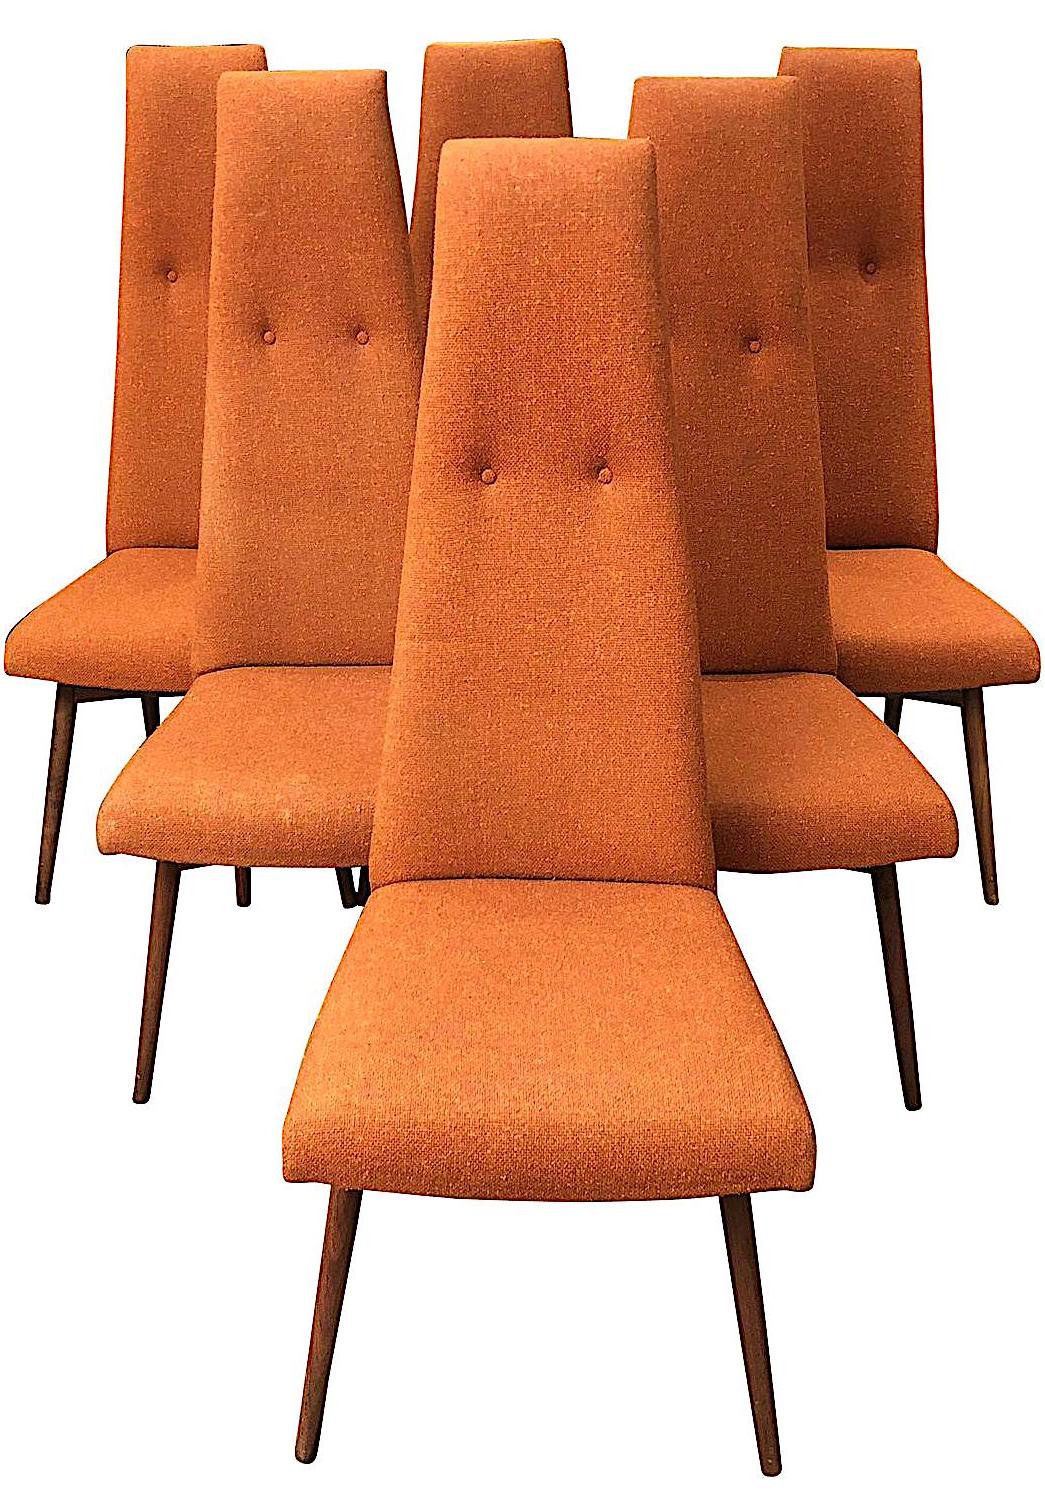 Adrian Pearsall orange chairs 1960s, a color photograph